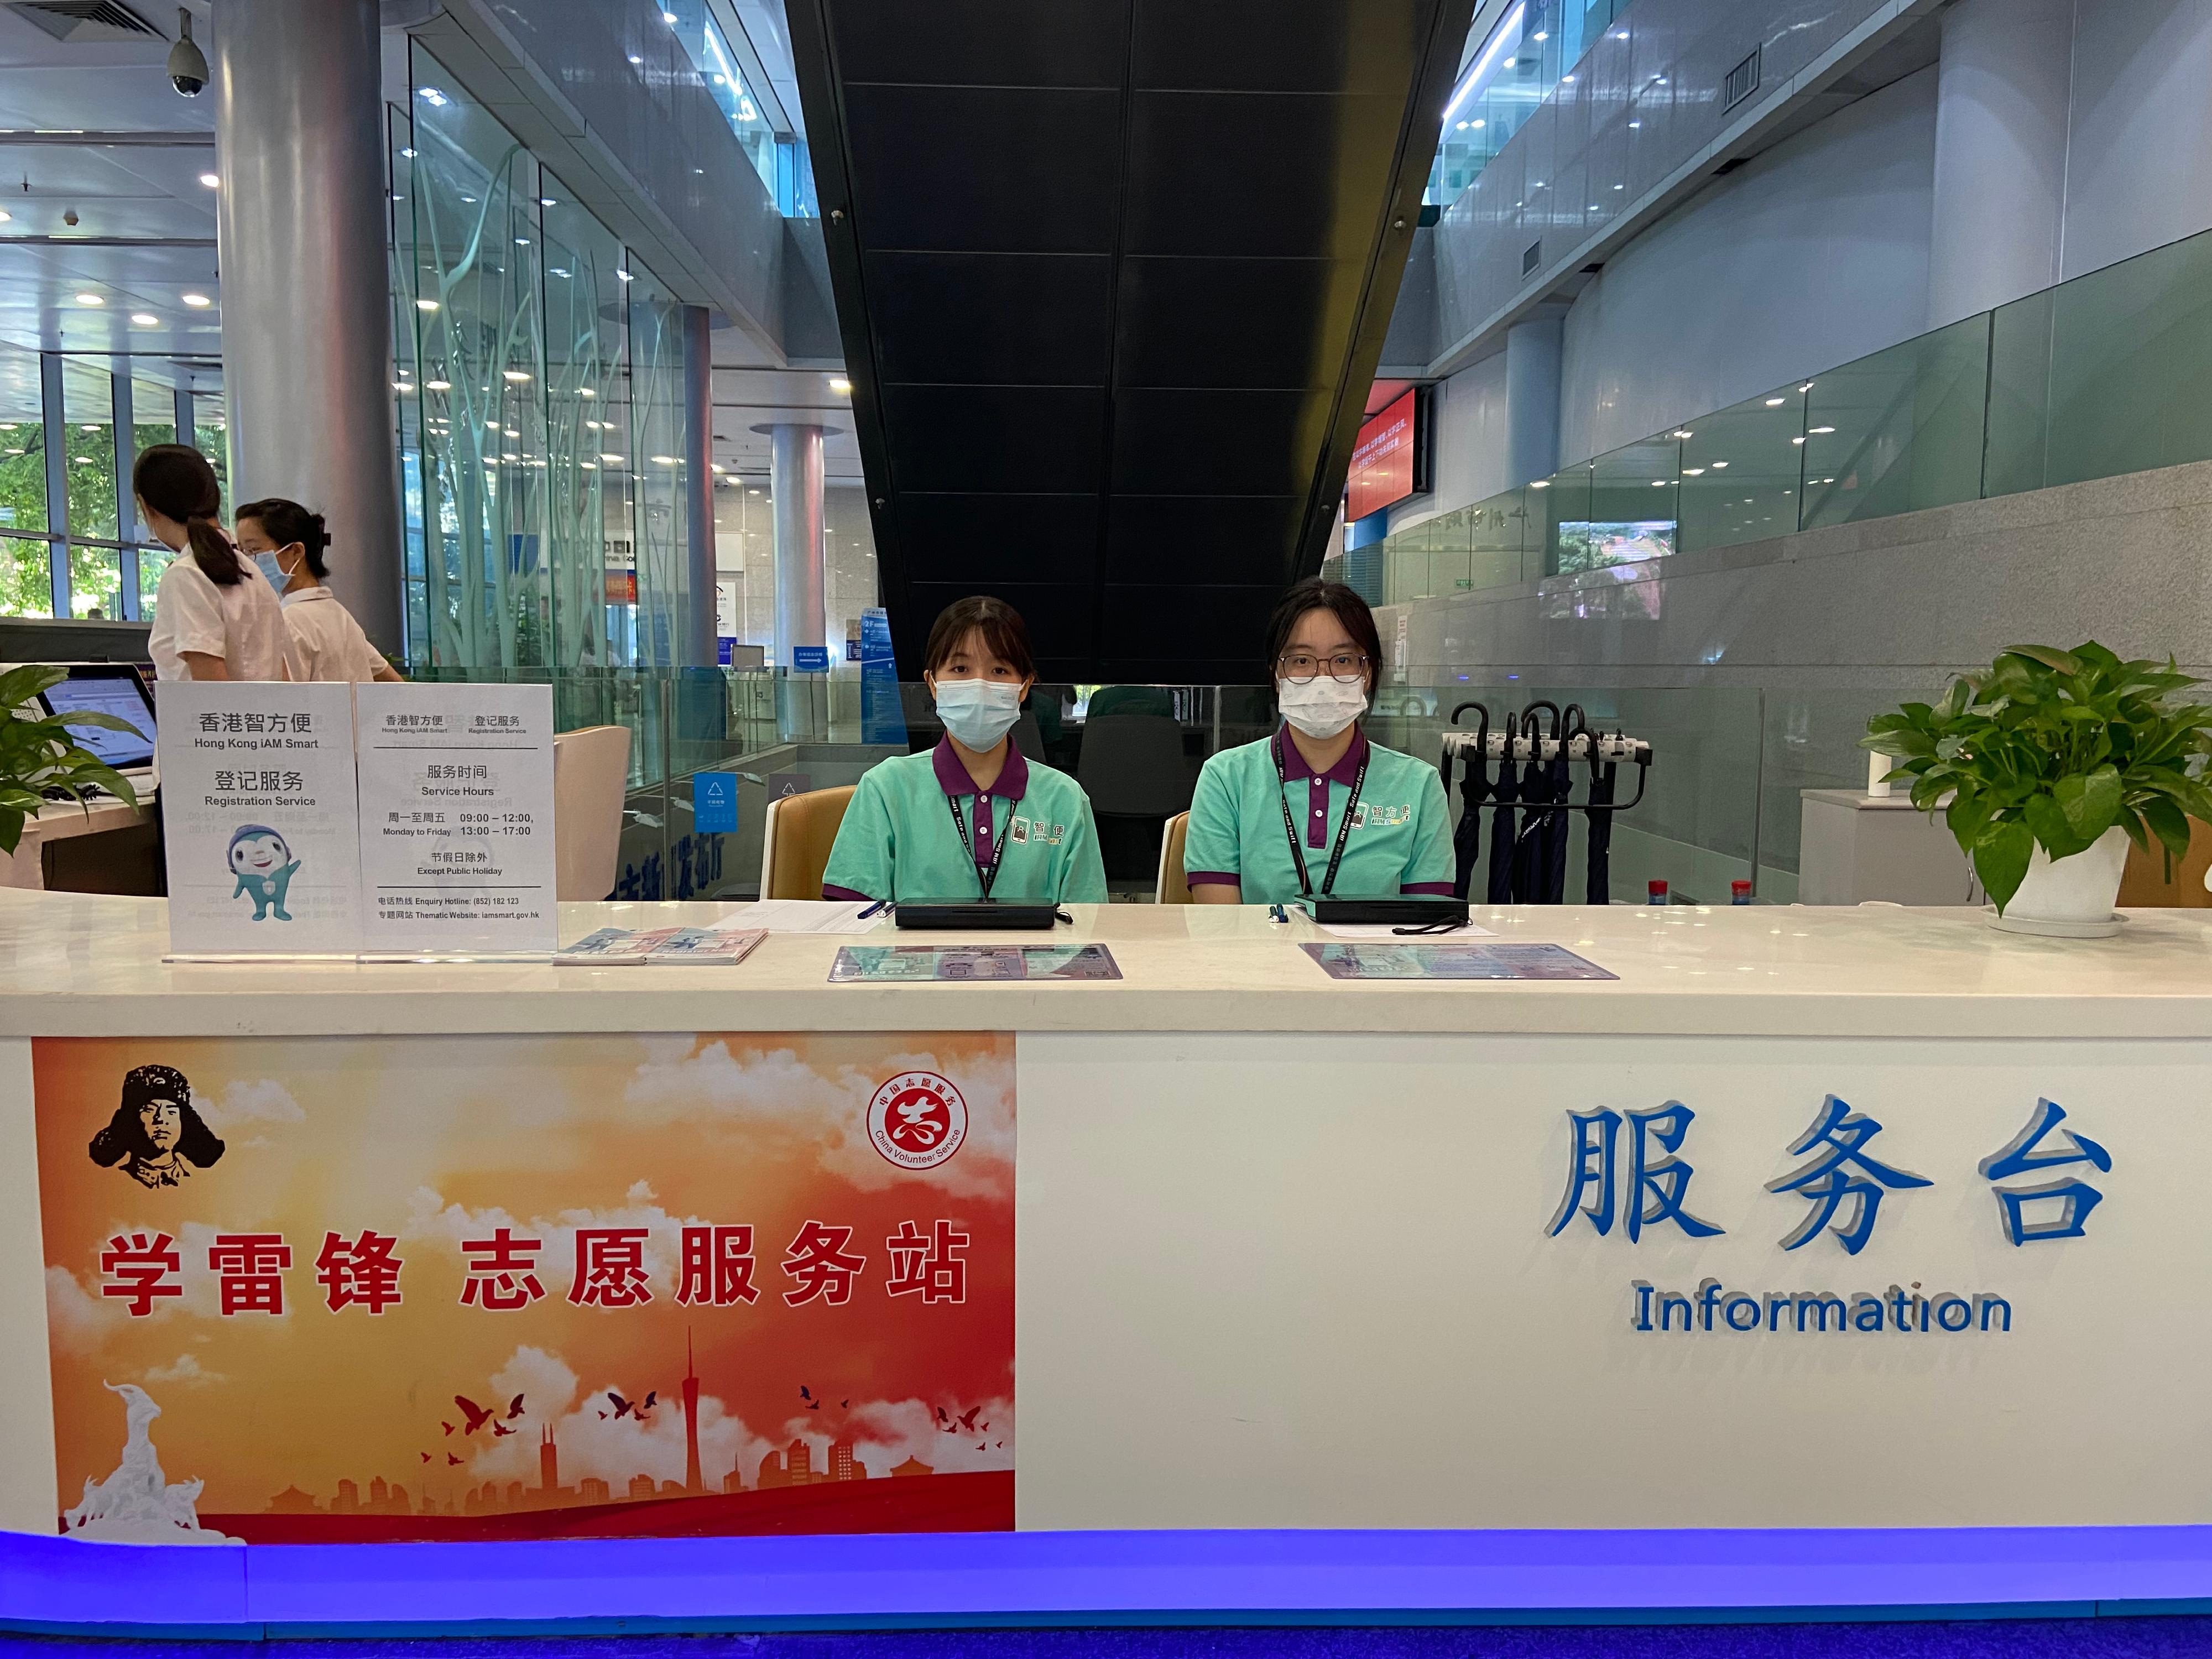 The first "iAM Smart" registration service counter in Guangzhou is now in service.